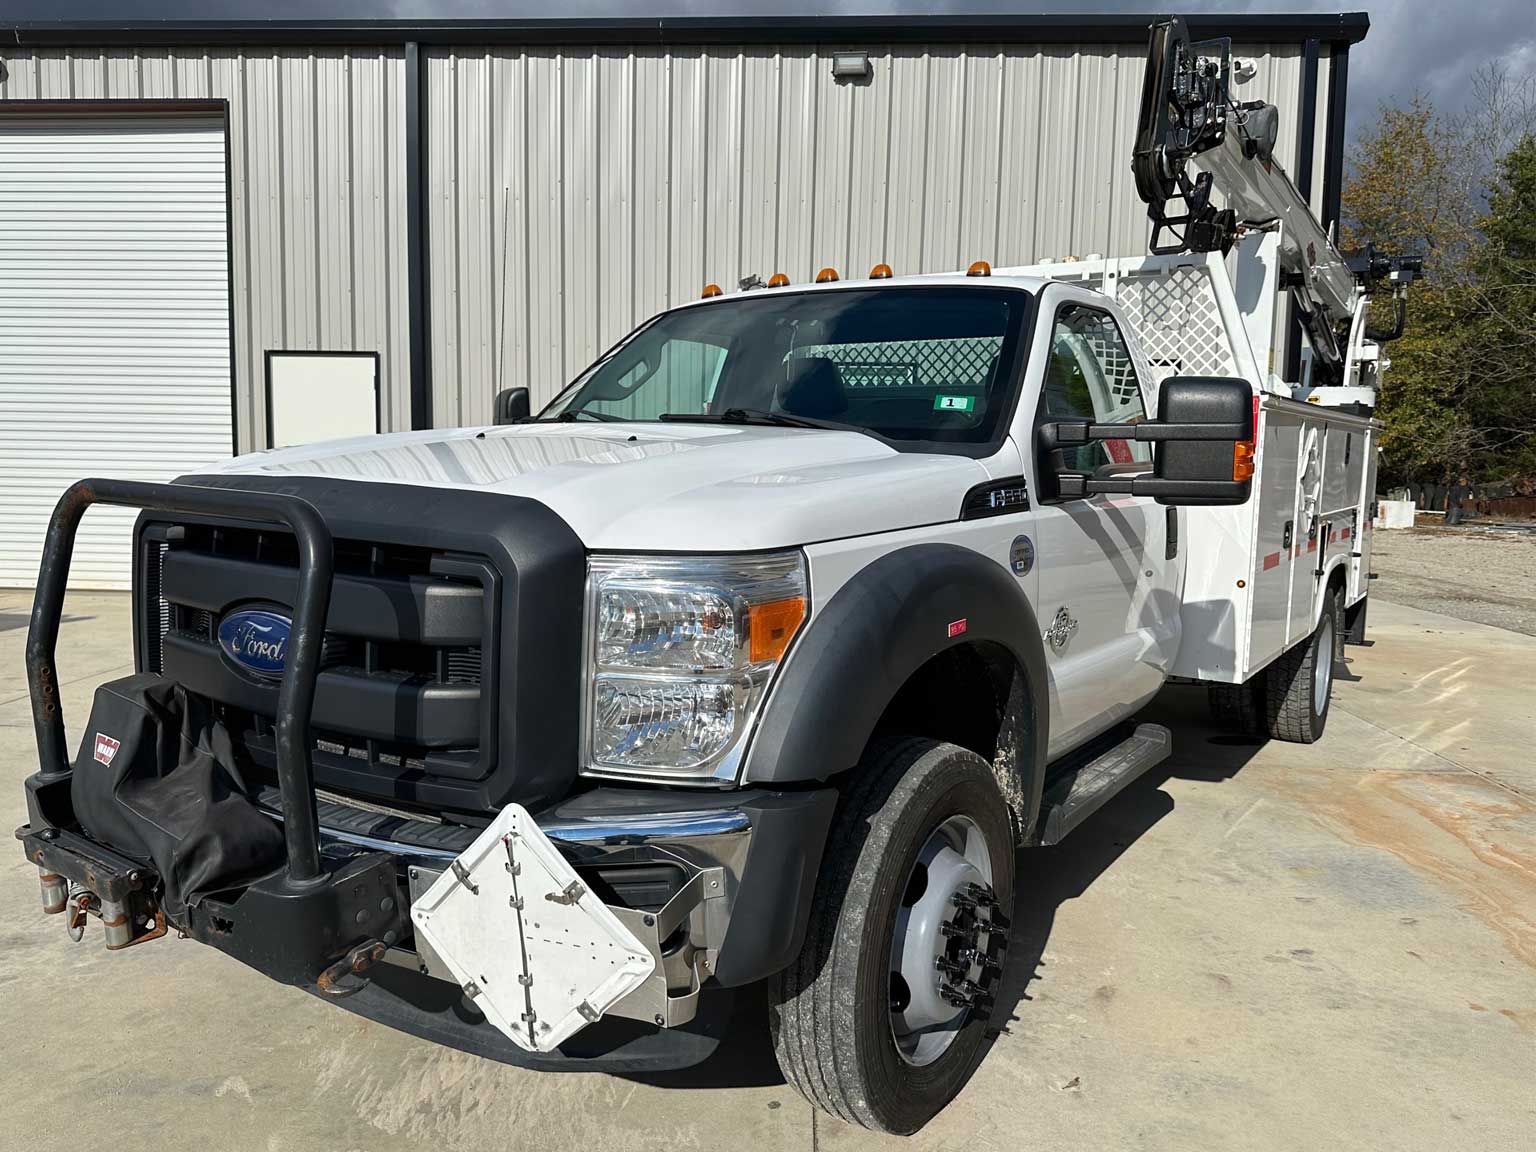 A white ford utility truck with a crane is parked in front of a building